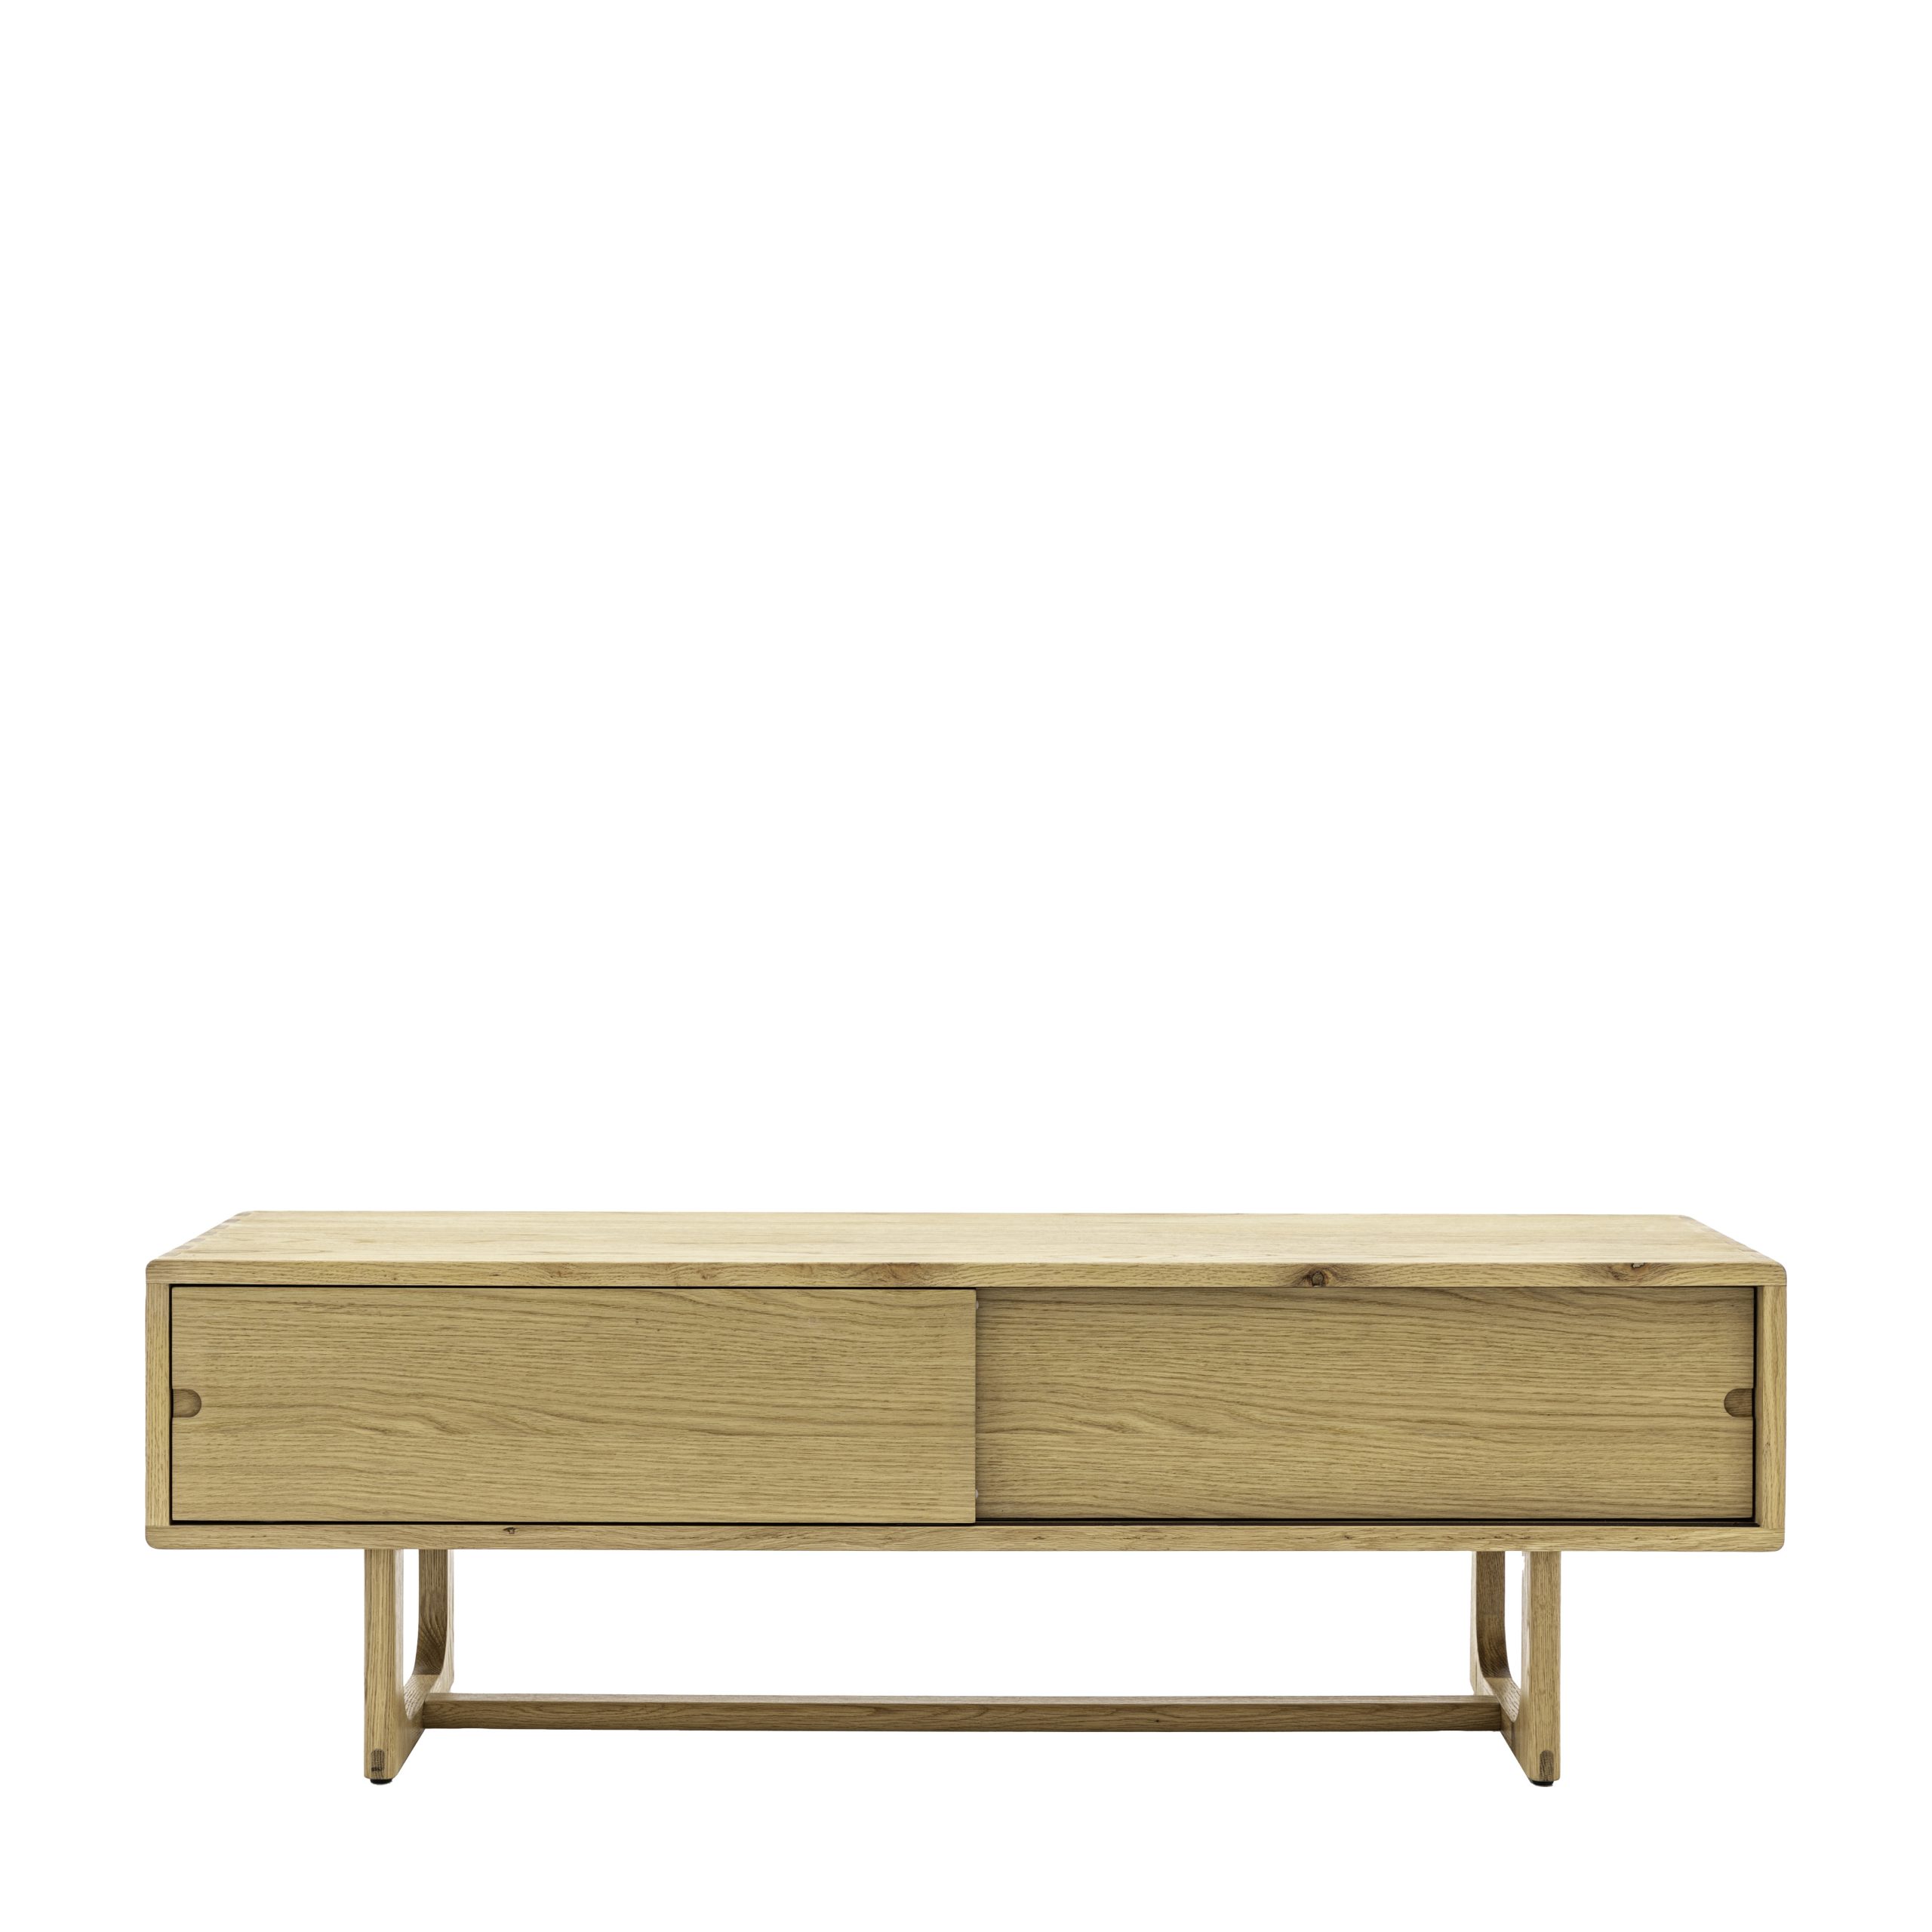 Gallery Direct Craft Media Unit Natural